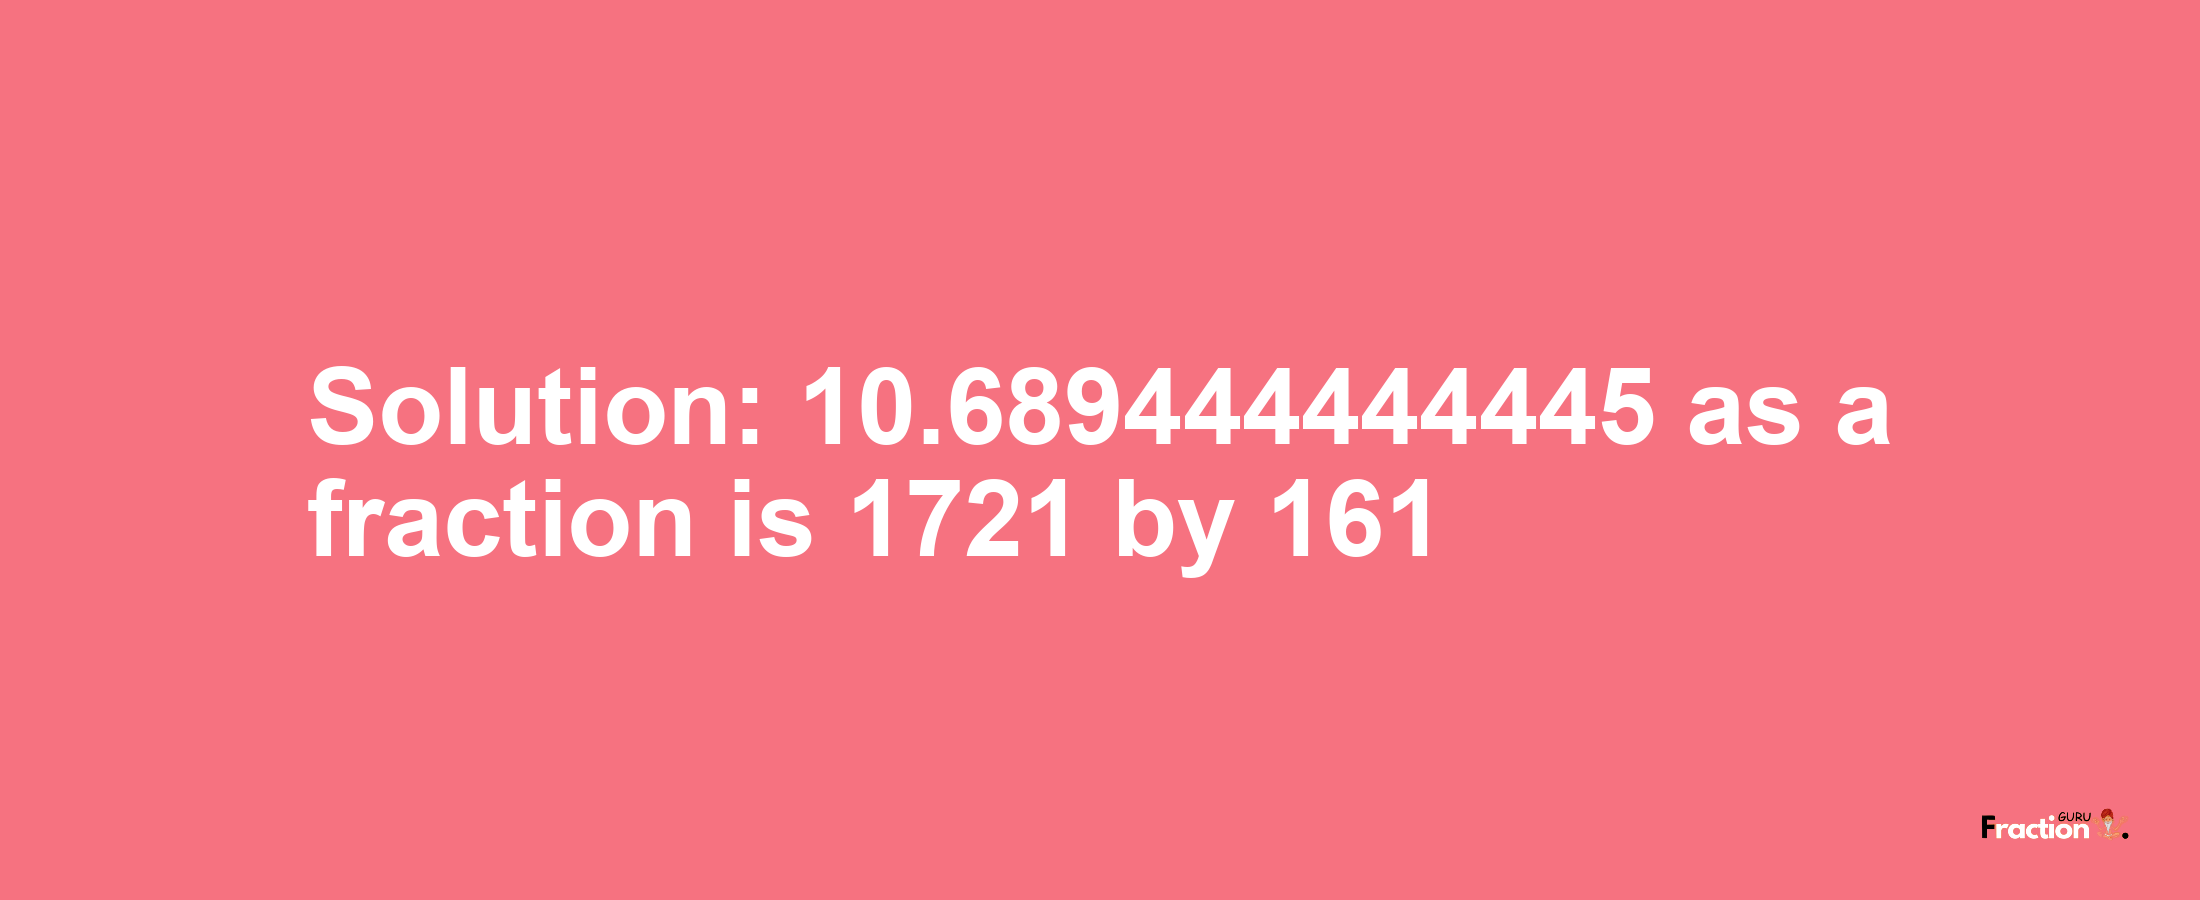 Solution:10.689444444445 as a fraction is 1721/161